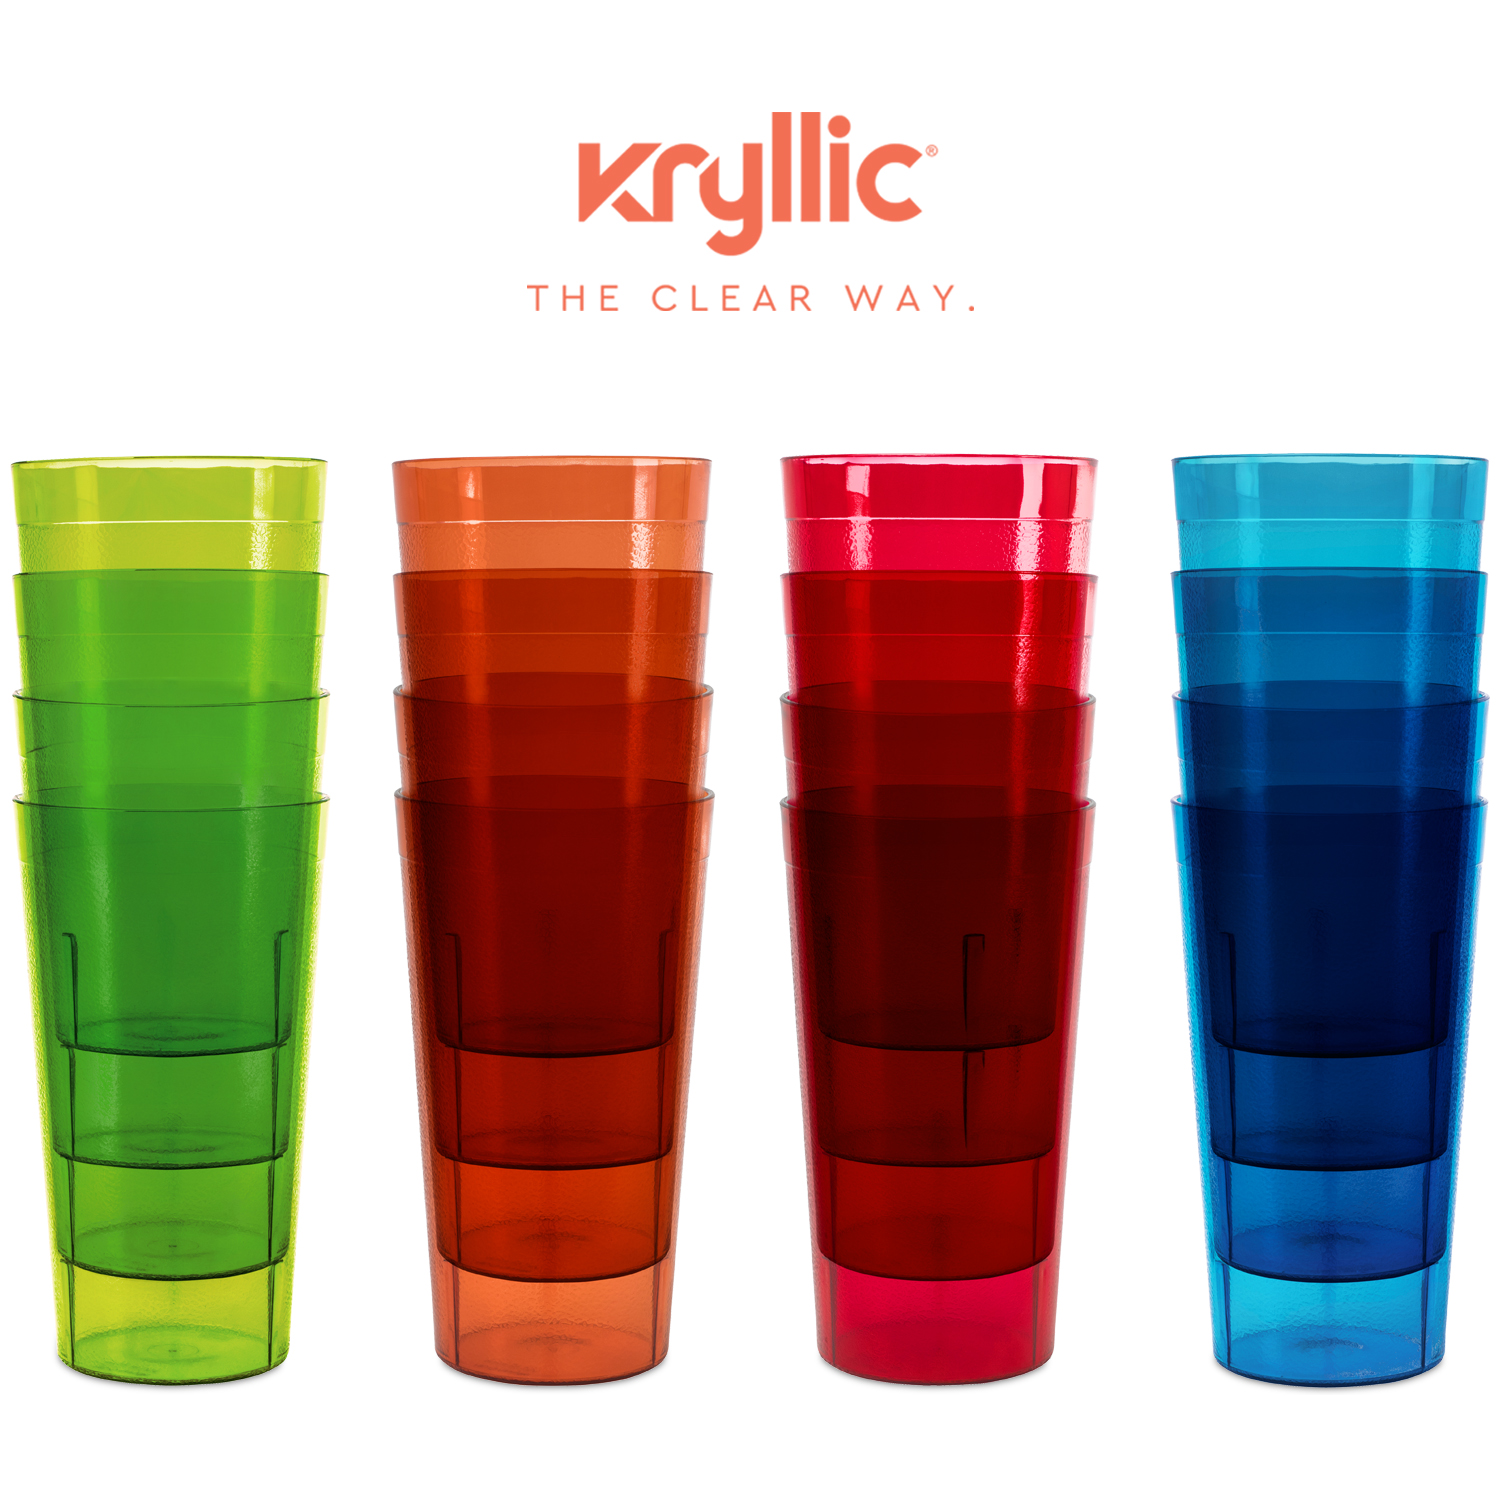 Plastic Cup Tumblers Drinkware Glasses - Break Resistant 20 oz. Kitchen Restaurant High Quality Set of 16 in 4 Assorted Colors - Best Gift Idea By Kryllic - image 4 of 11